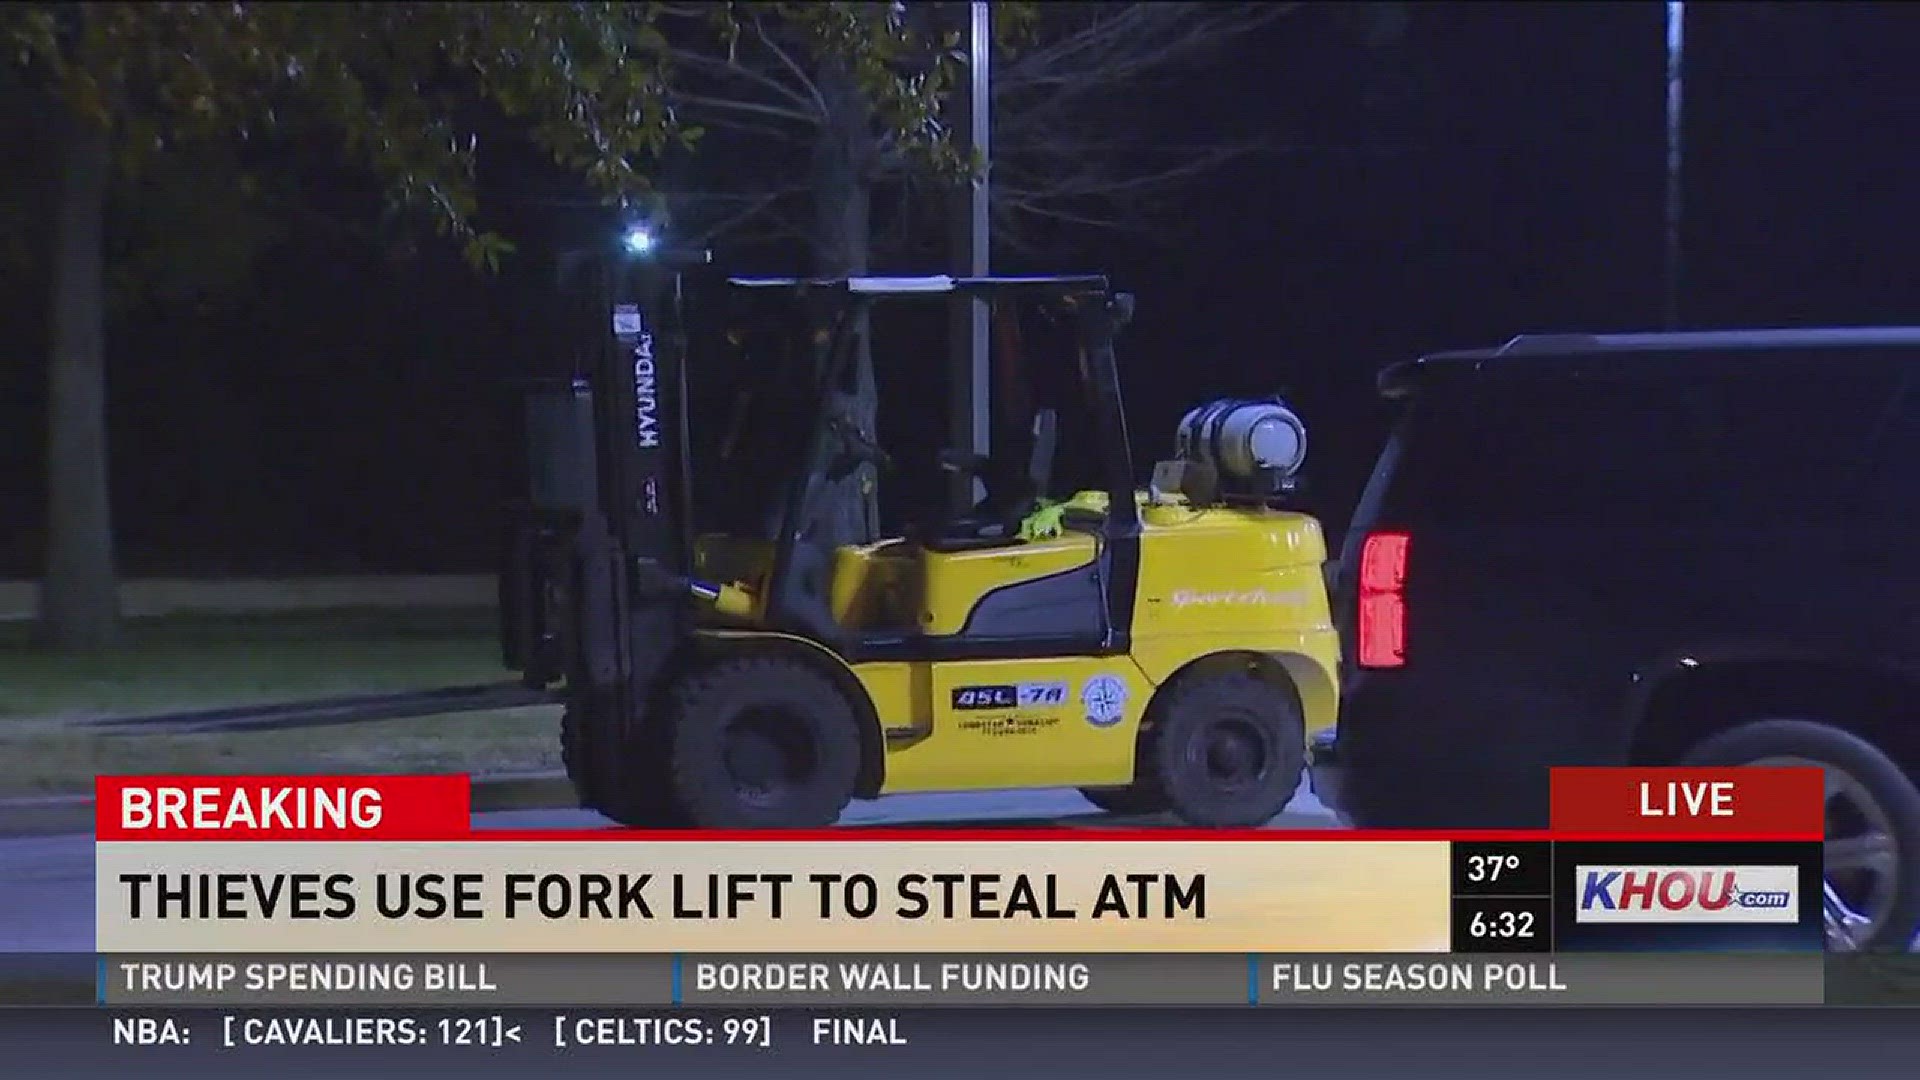 Deputies say thieves used a forklift to steal an ATM from a bank off the North Freeway early Monday.